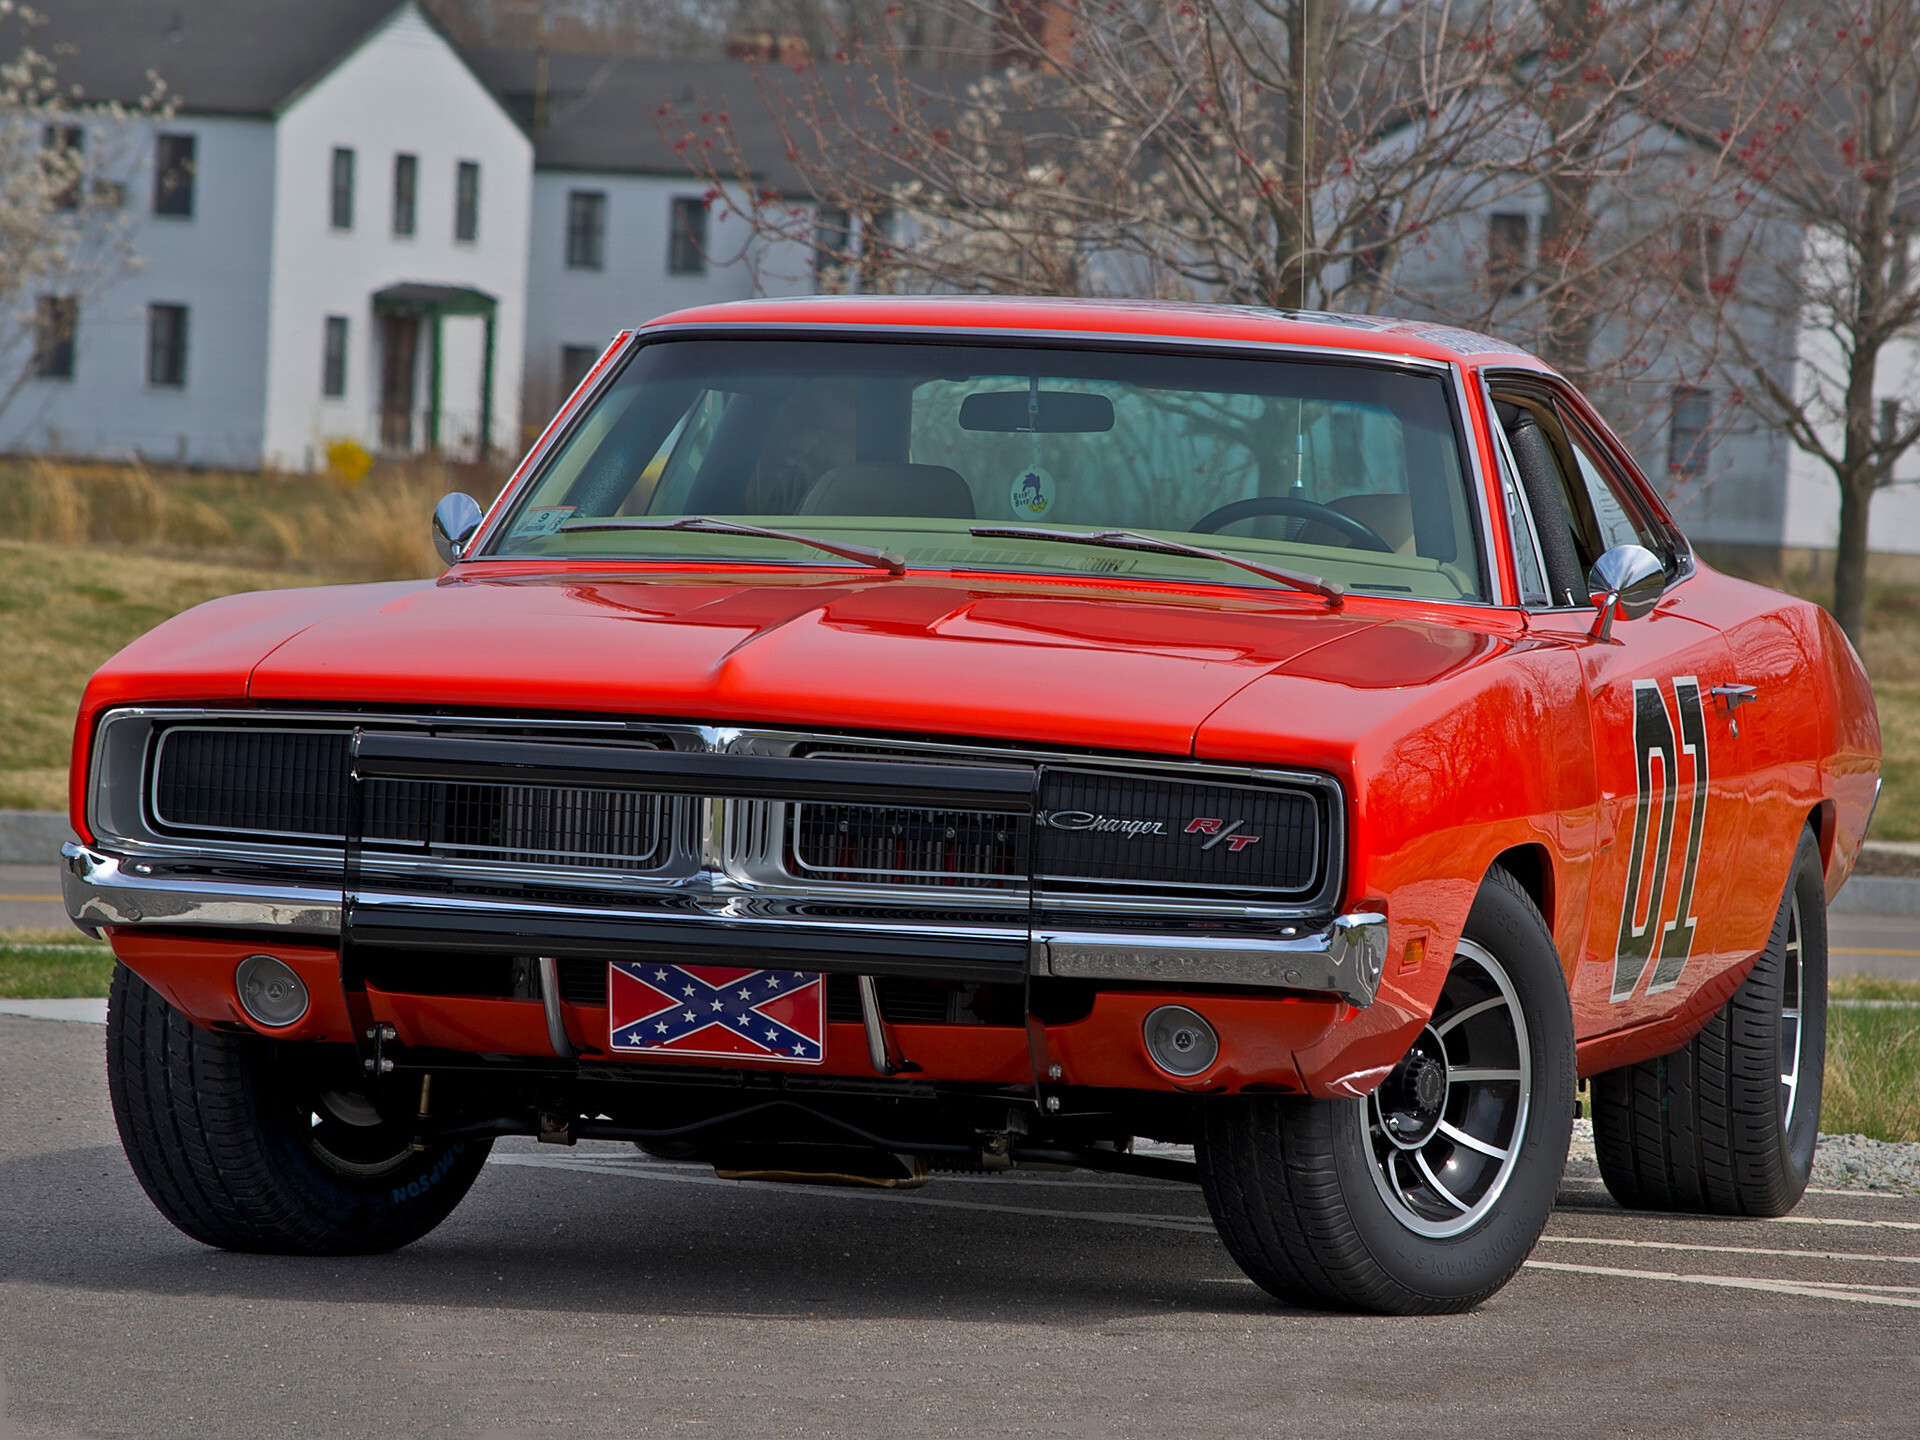 General Lee Car: 1969 Dodge car, The Confederate flag, A vehicle used in filming the TV series, Charger R/T. 1920x1440 HD Background.